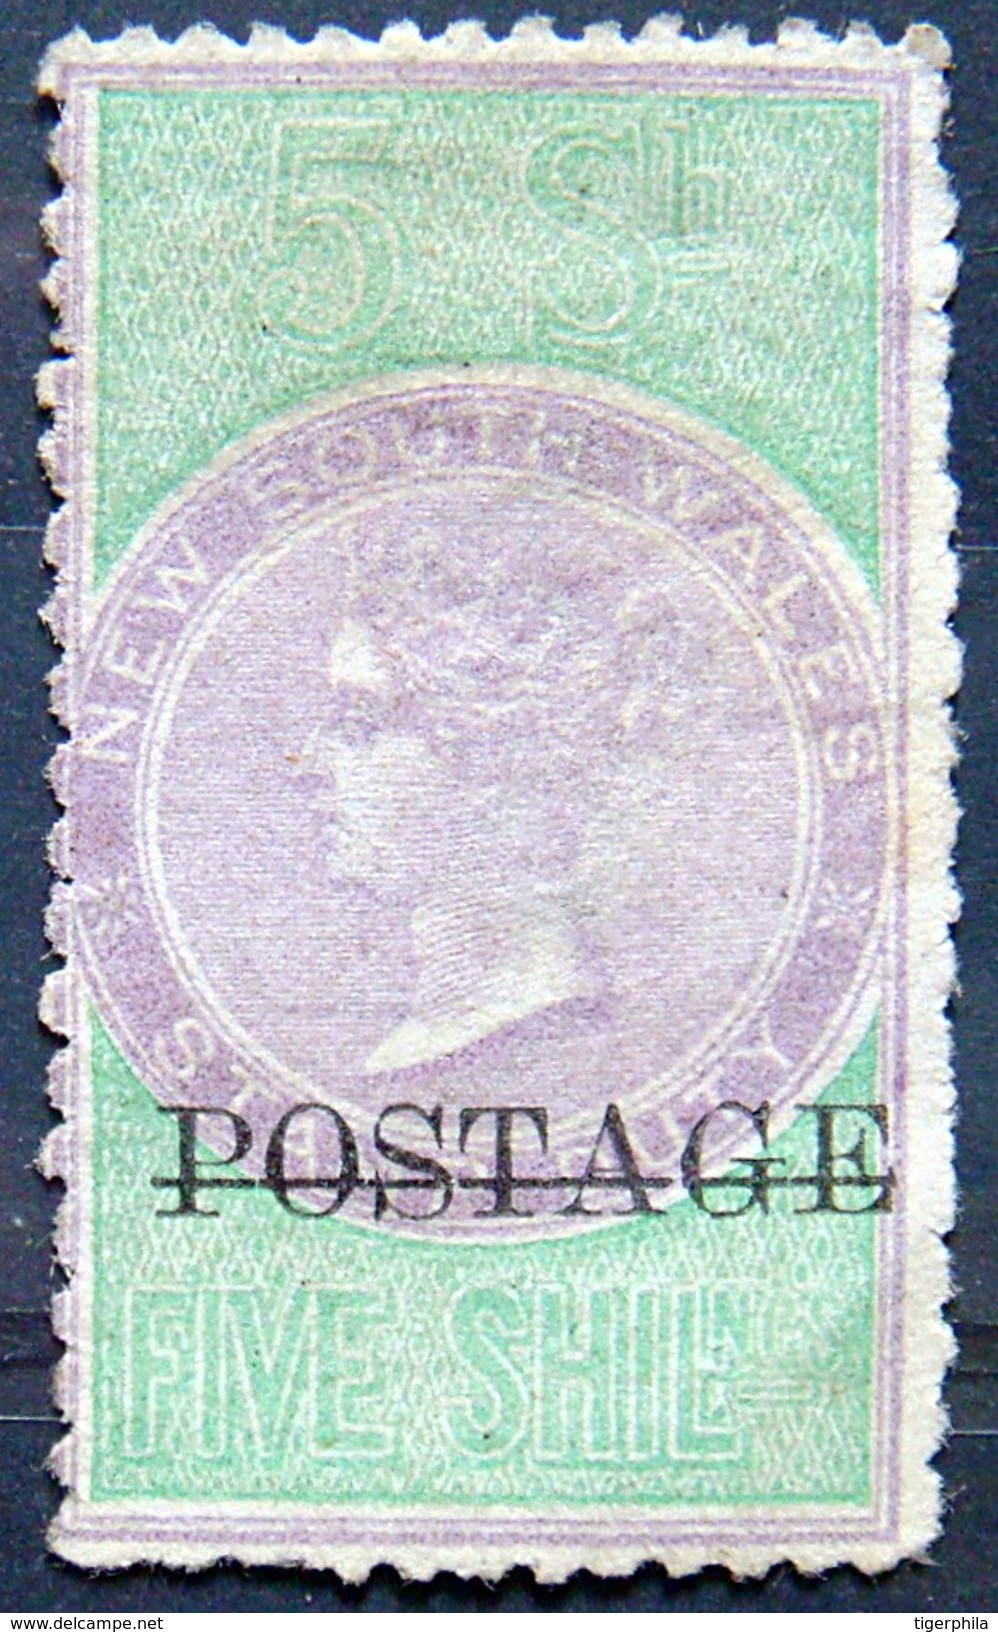 NEW SOUTH WALES 1885 5shillings Queen Victoria Mint No Gum Scott72 CV$950 &clubs;&clubs;RARE&clubs;&clubs; - Mint Stamps